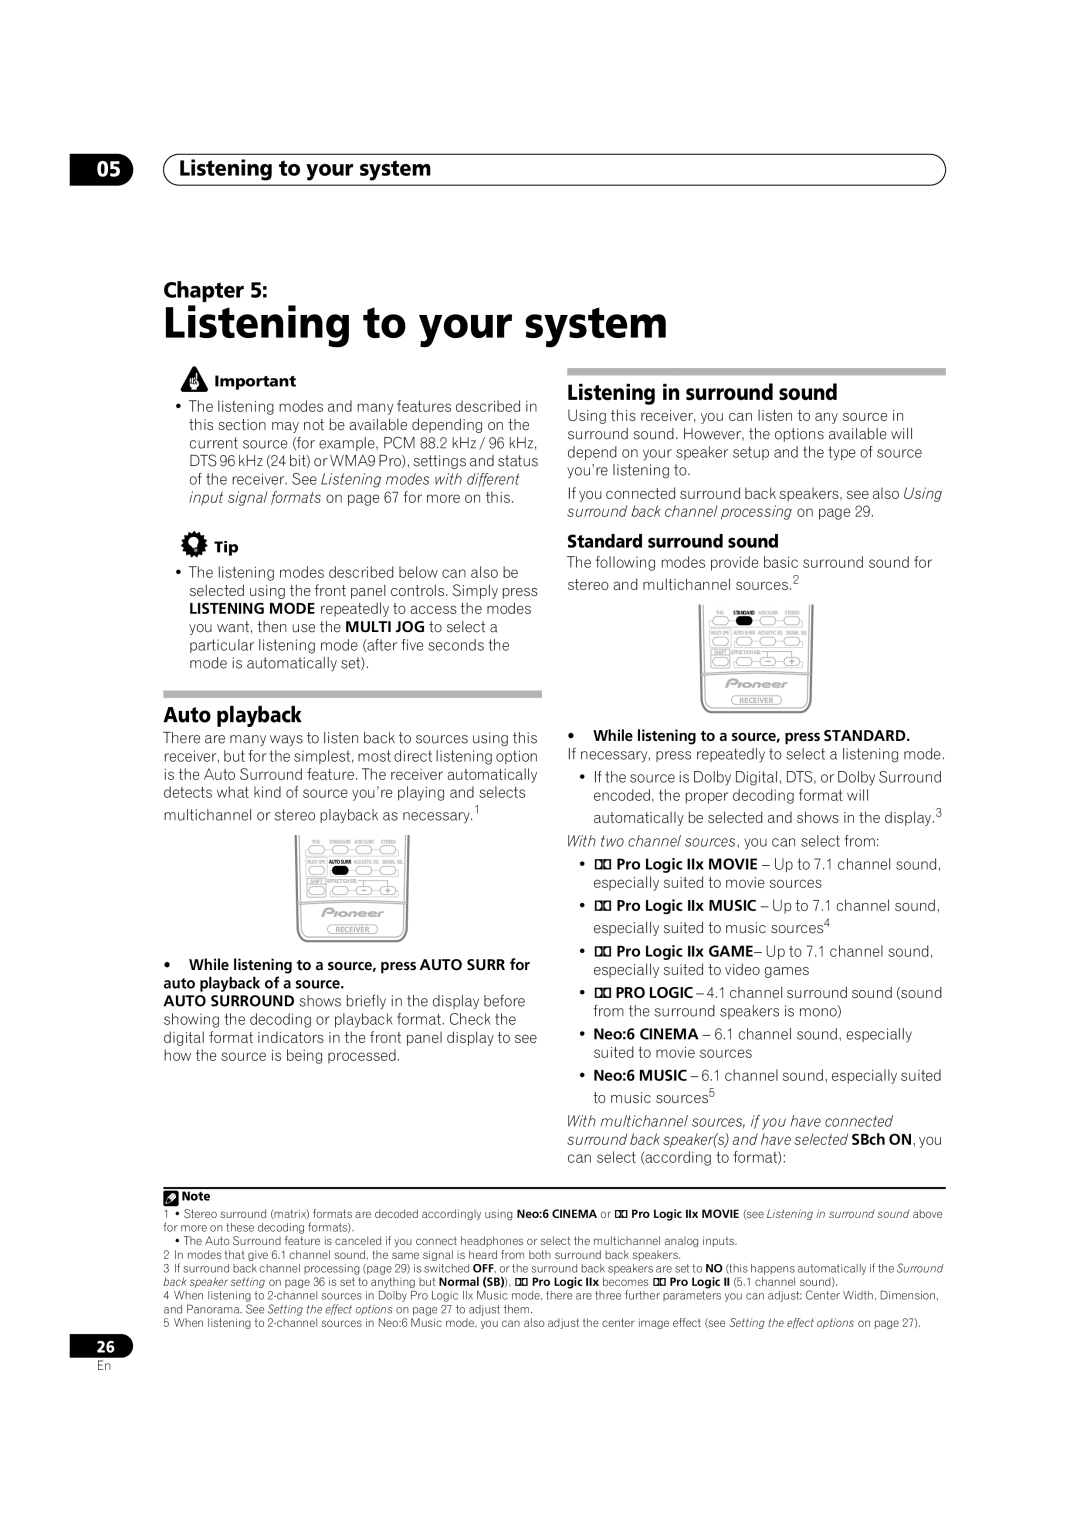 Pioneer VSX-1016V-K, VSX-1016V-S manual 05Listening to your system Chapter, Auto playback, Listening in surround sound 